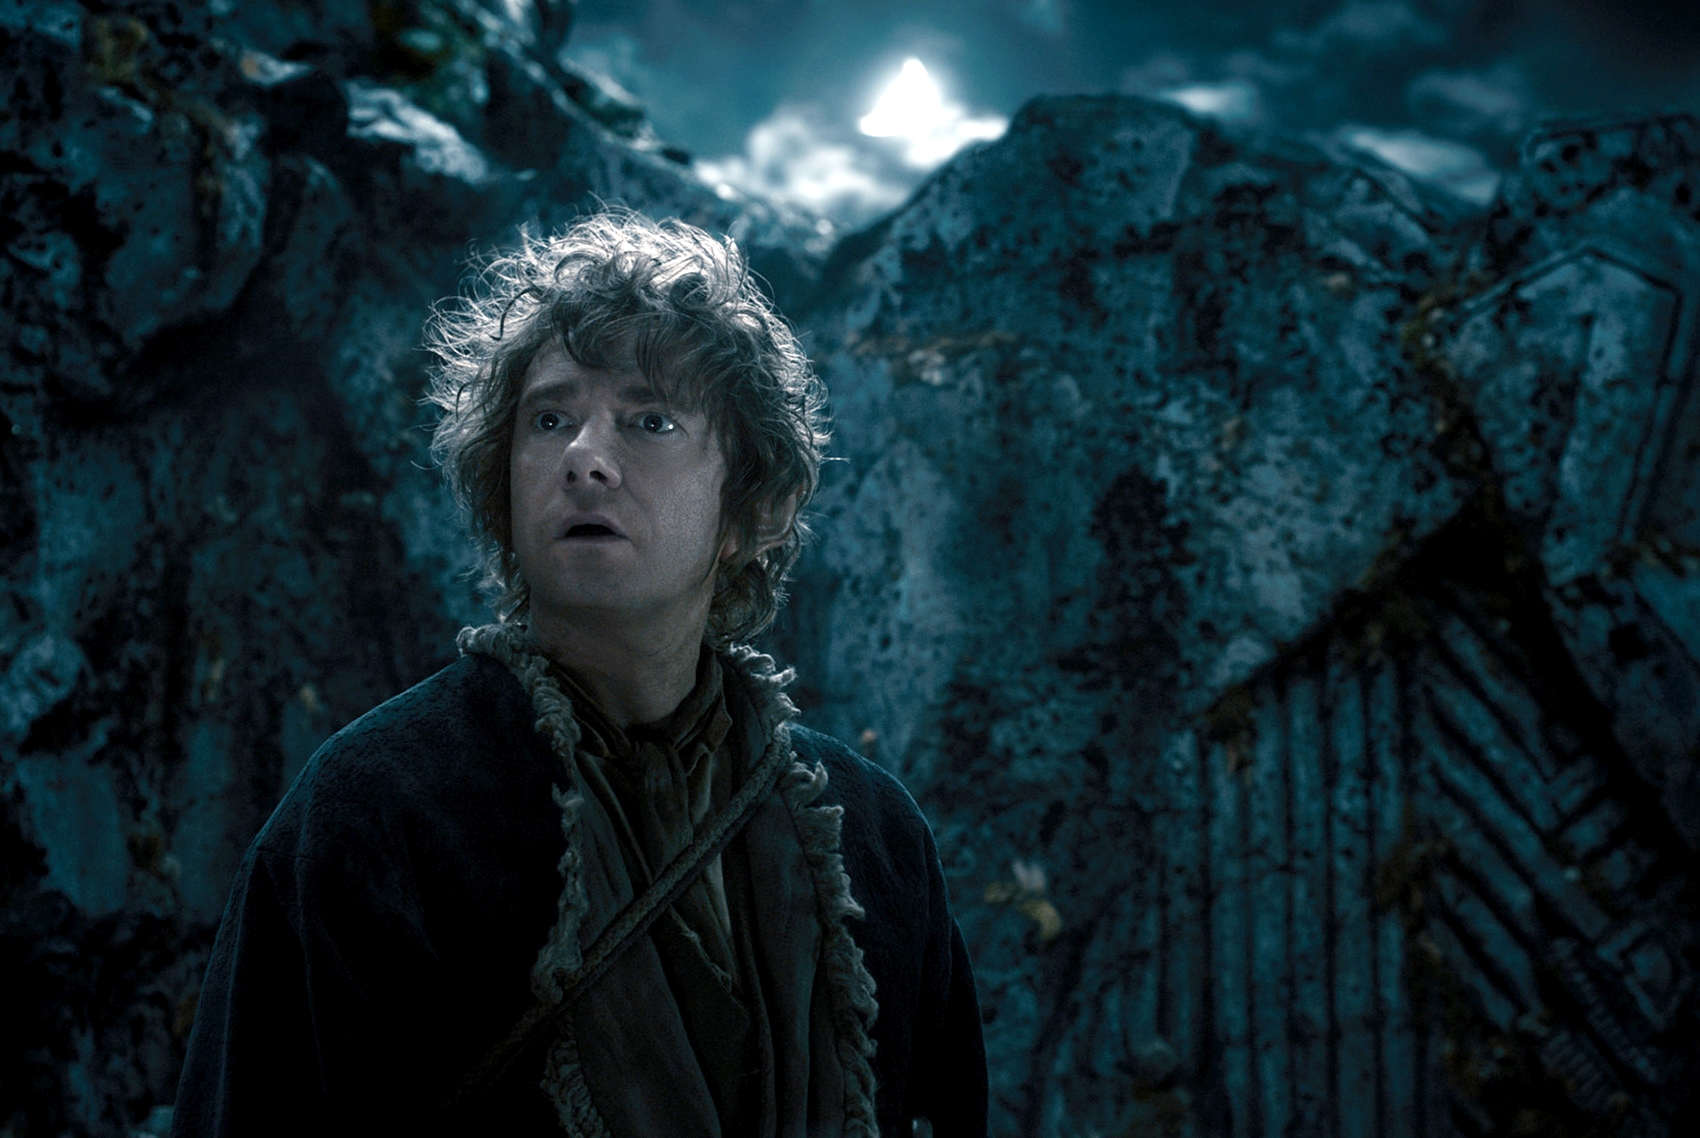 download the new for apple The Hobbit: The Desolation of Smaug